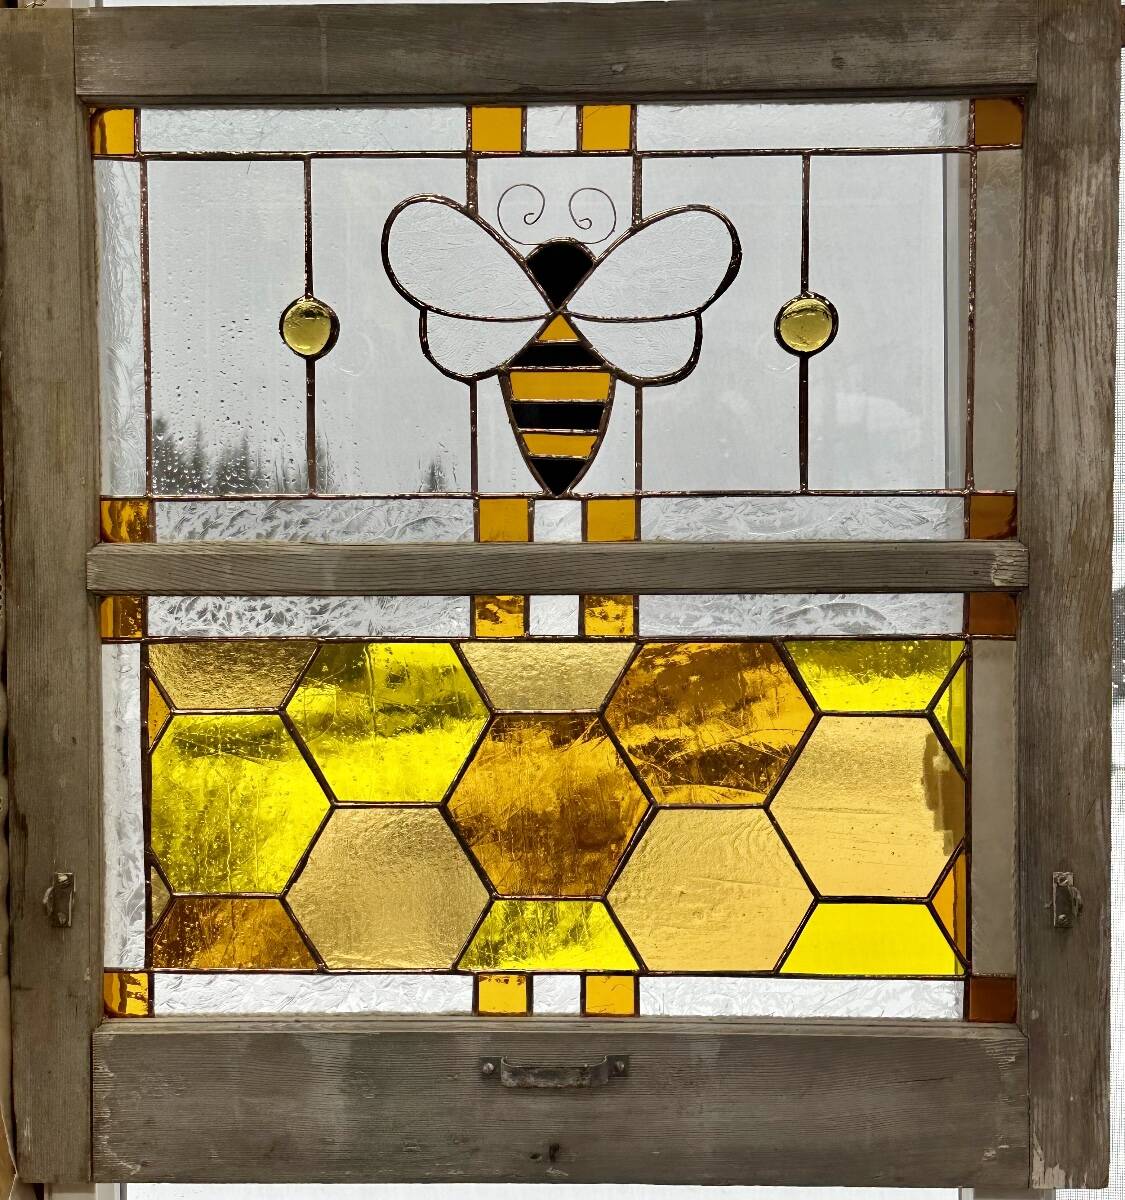 Stained-glass bumble bee by Mike de Sanno, who will be creating a piece during the Ready Set Art fundraiser for Ptarmigan Arts. (Photo provided by Mike de Sanno)